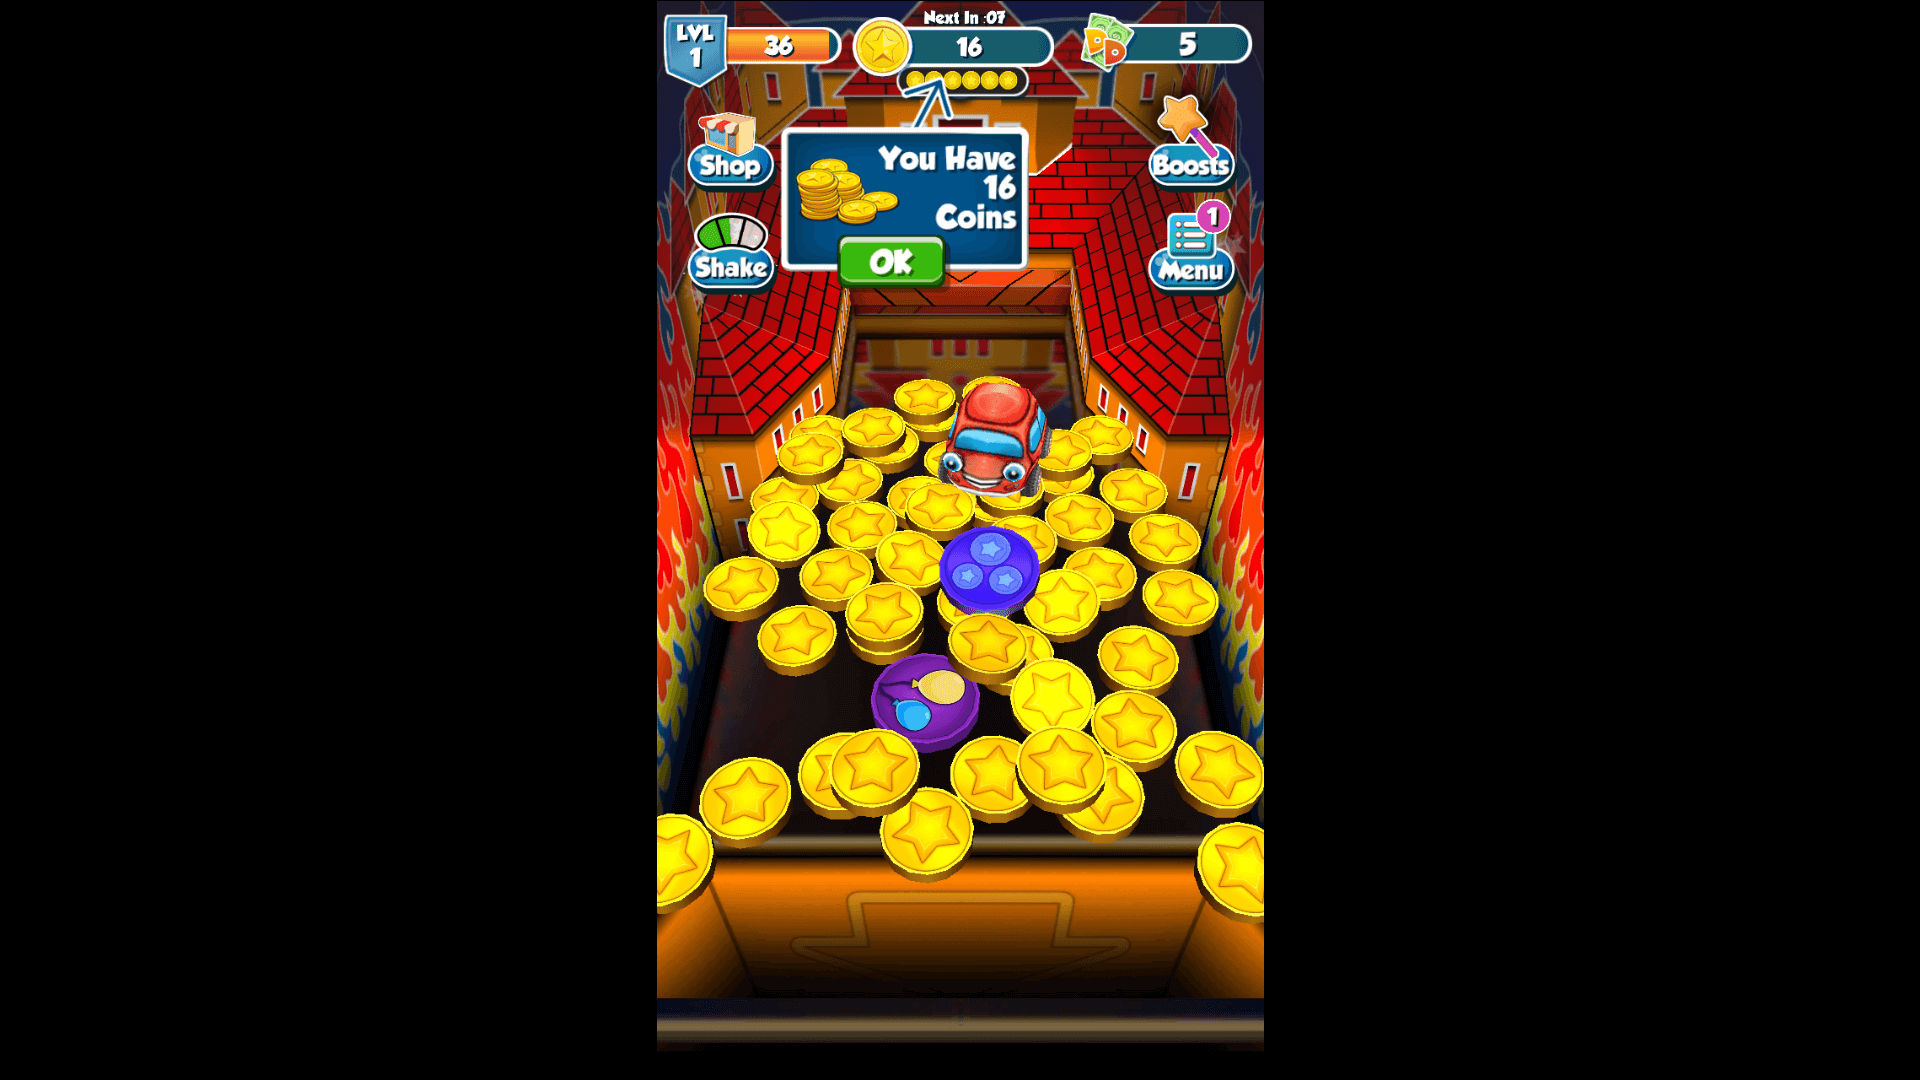 Coin dozer game free download for laptop 3 4